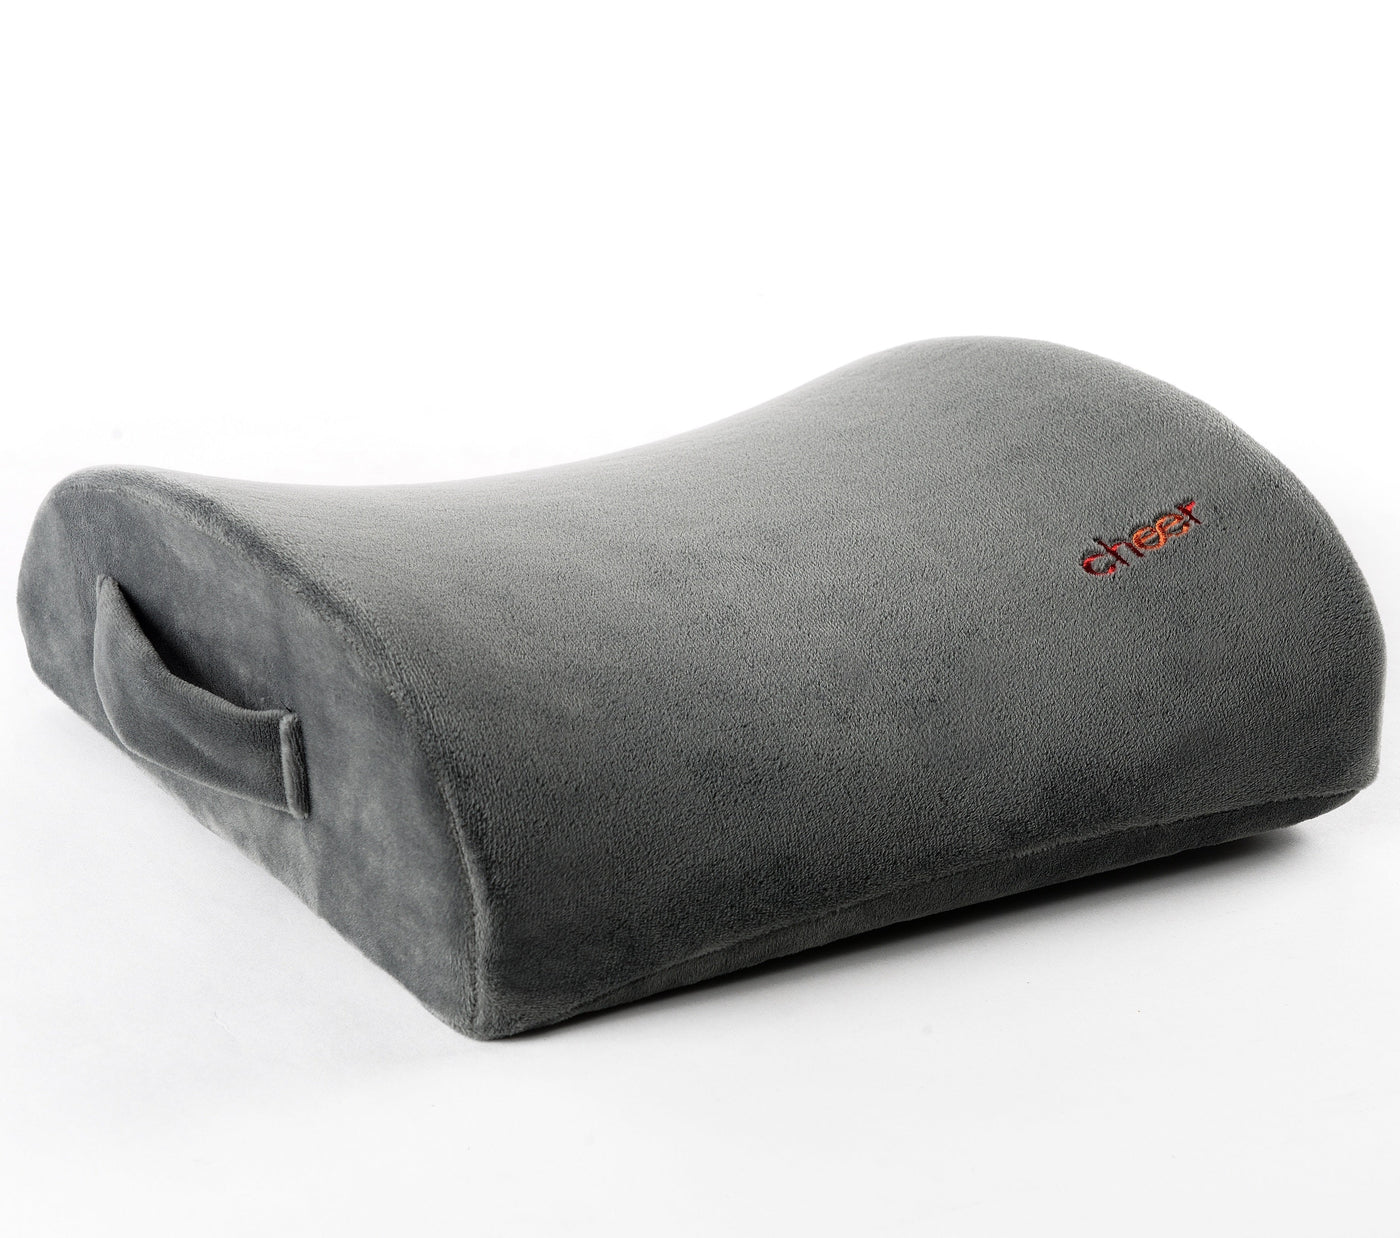 Cheer Collection Memory Foam Lumbar Cushion For Lower Back Pain